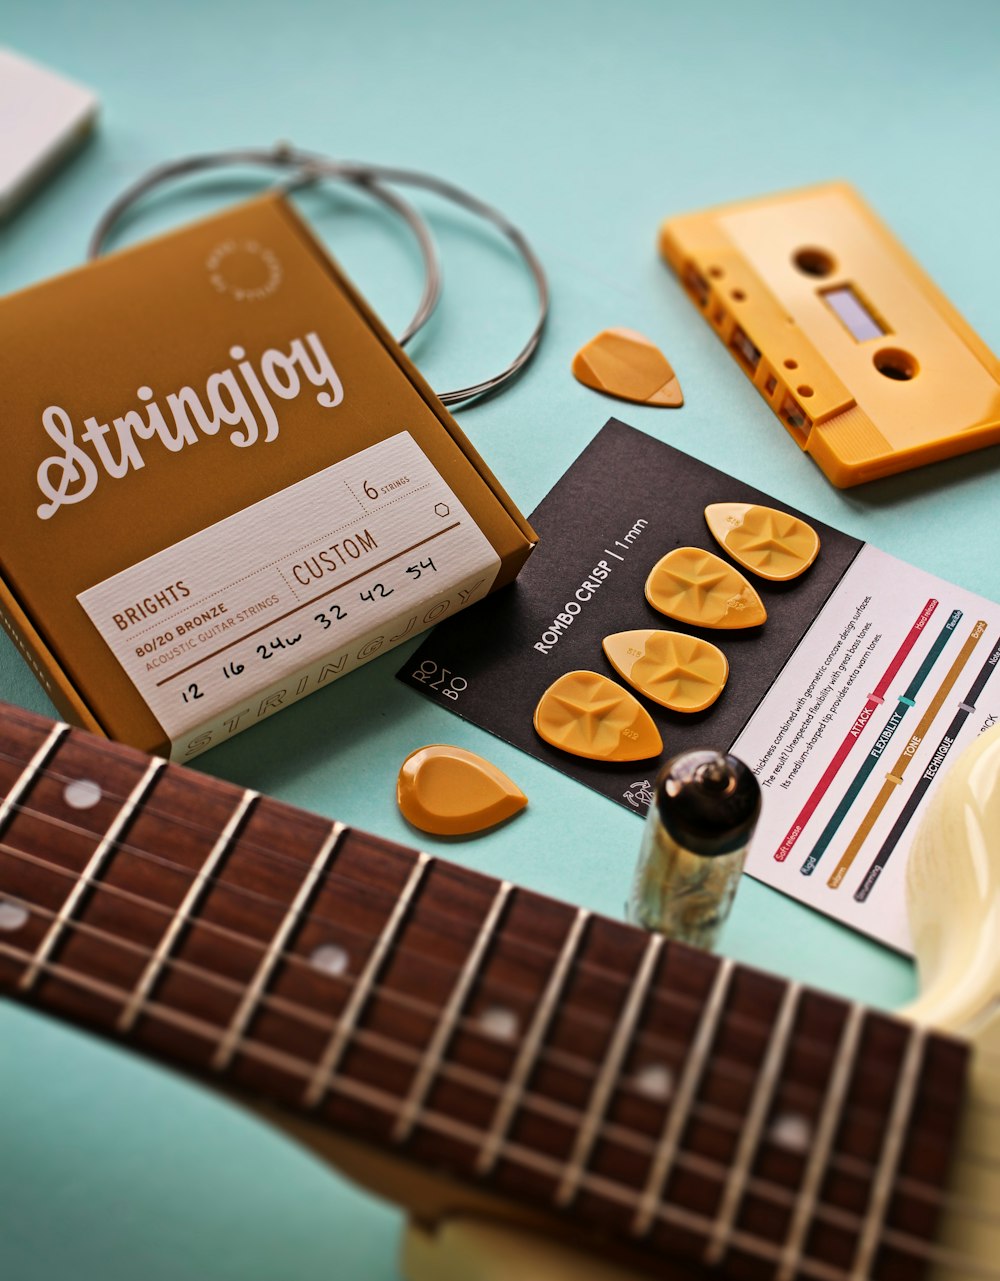 a guitar, a notepad, and some other items on a table